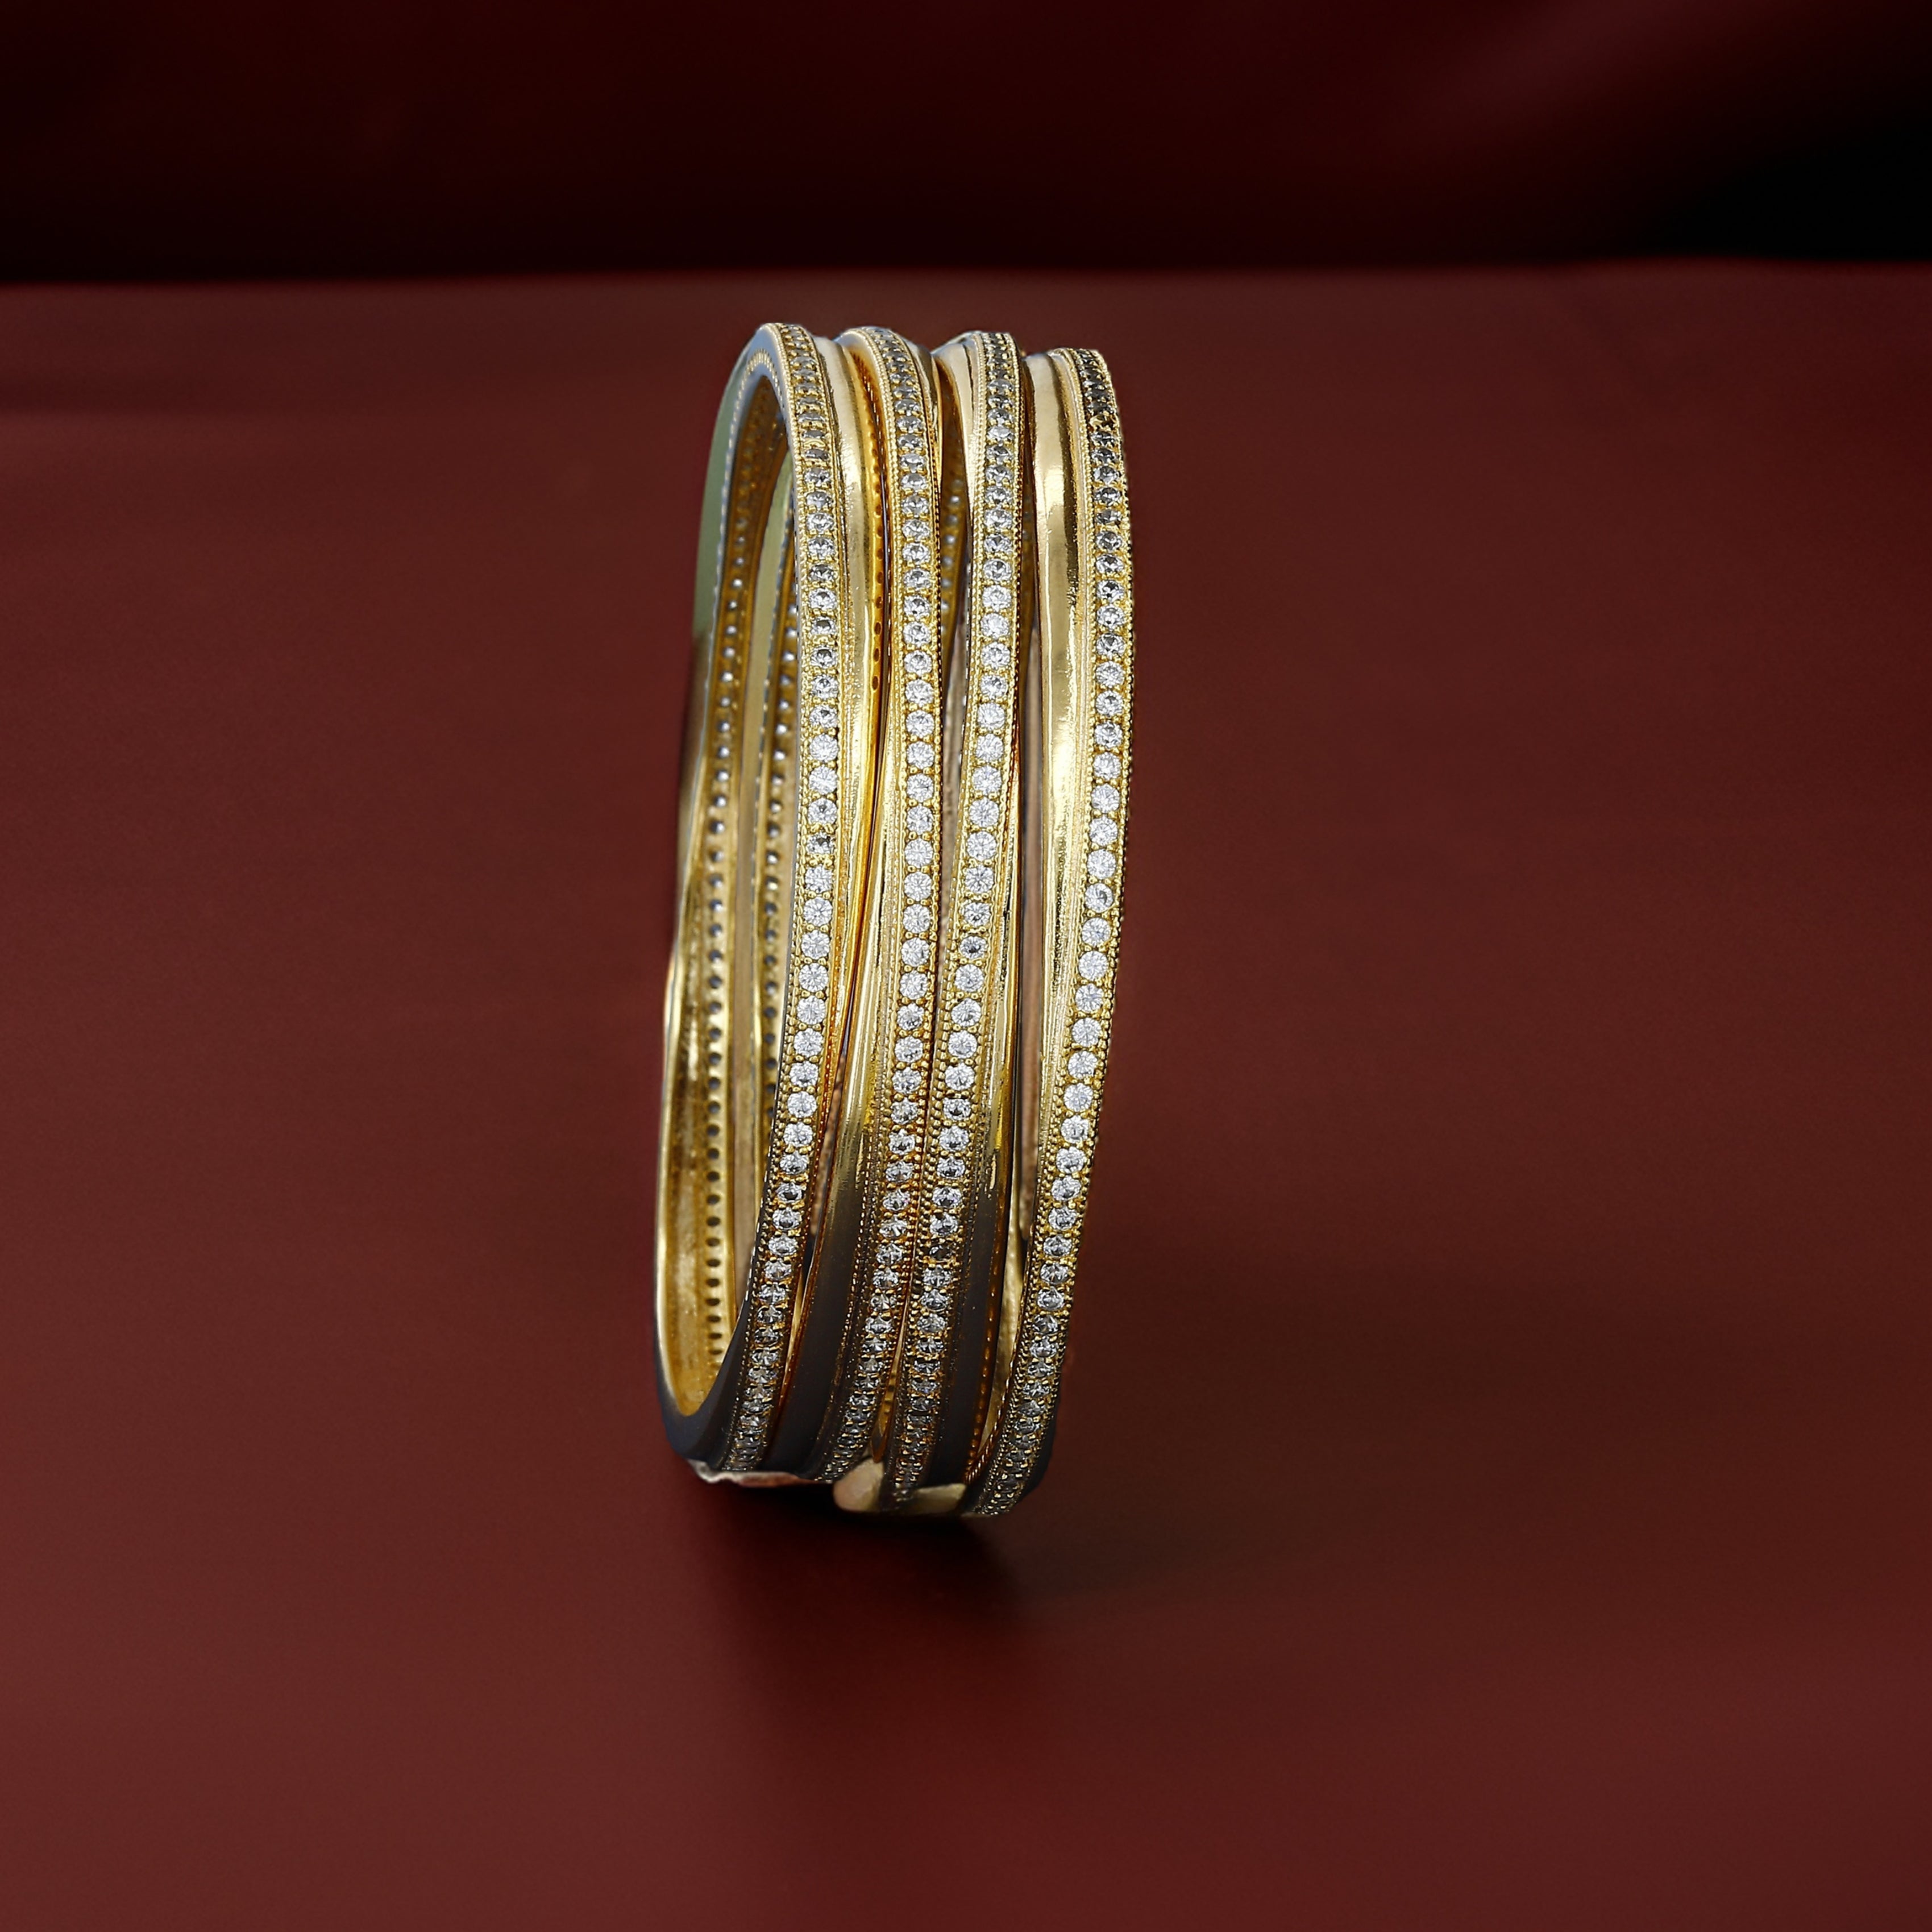 Occasion Wear Diamond Goldplated Bangles